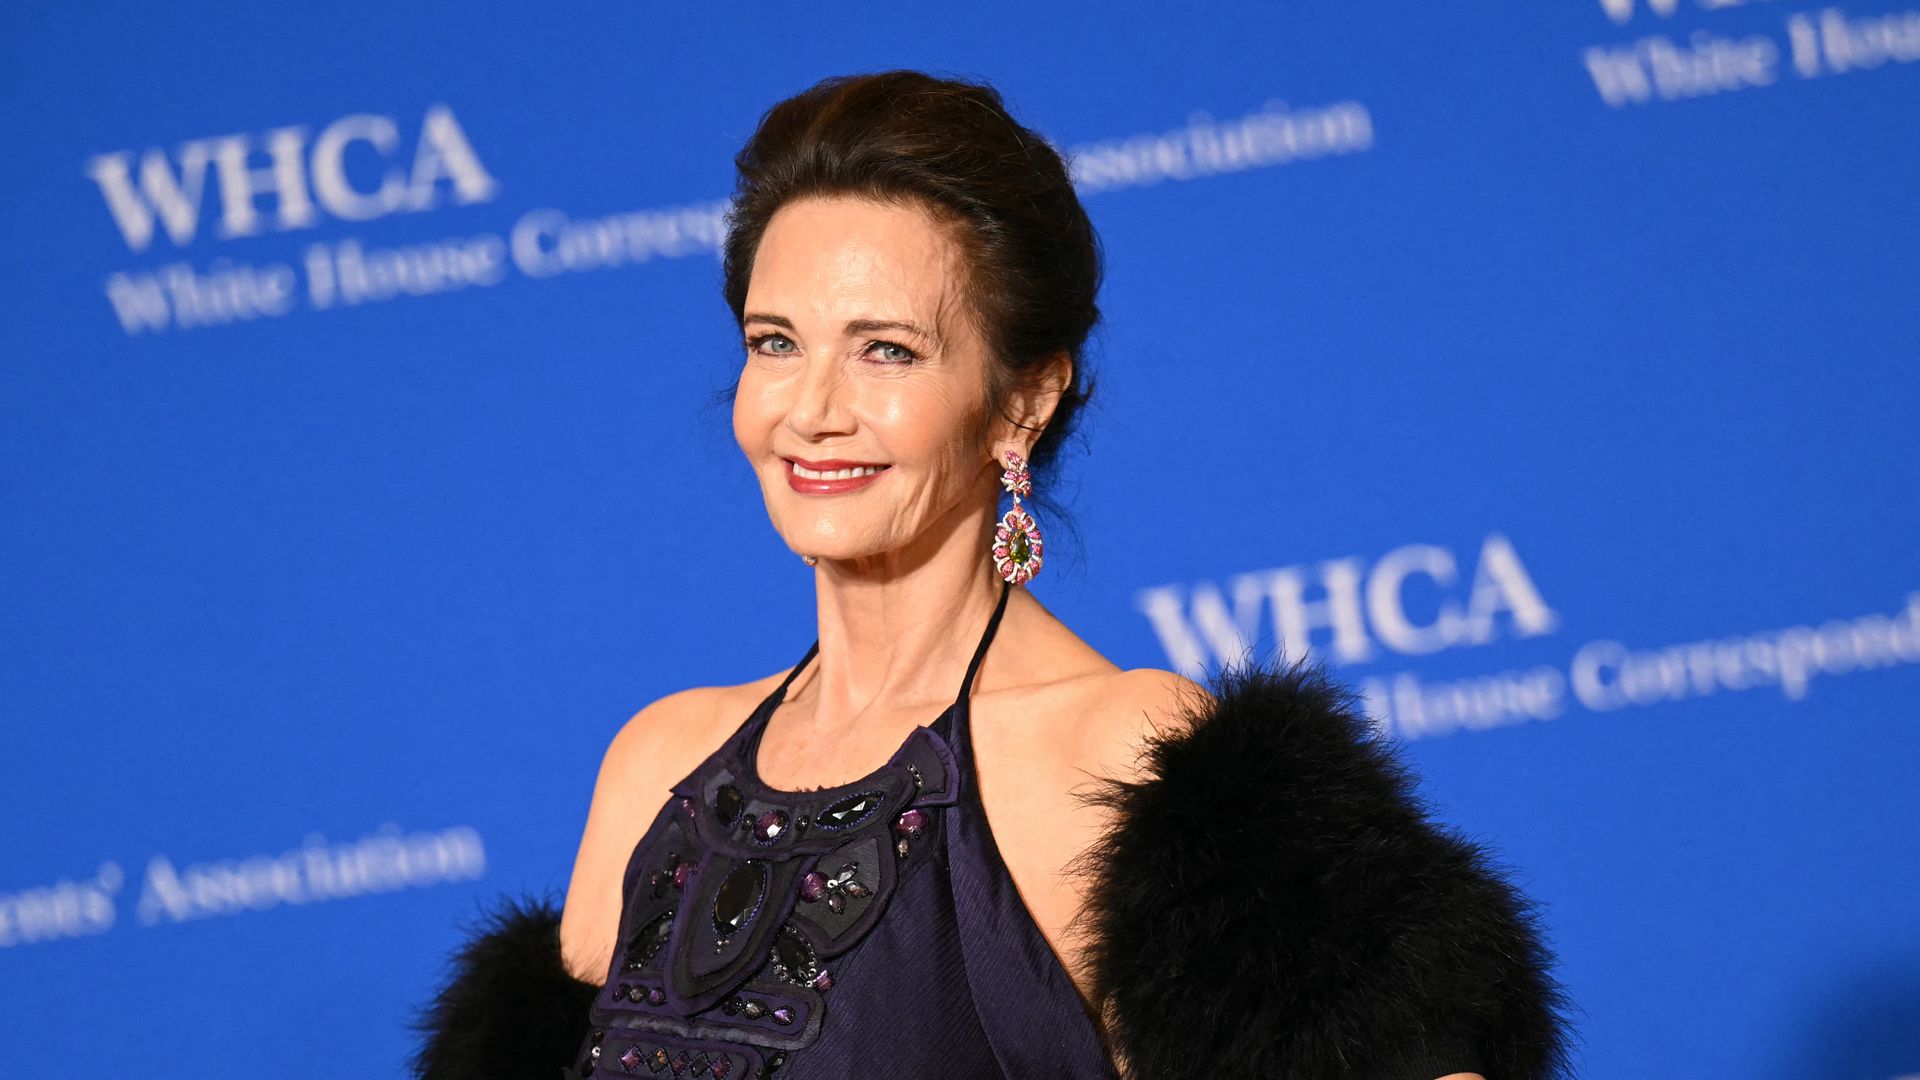 Wonder Woman star Lynda Carter, 72, shares glamorous pictures of lookalike daughter for special occasion